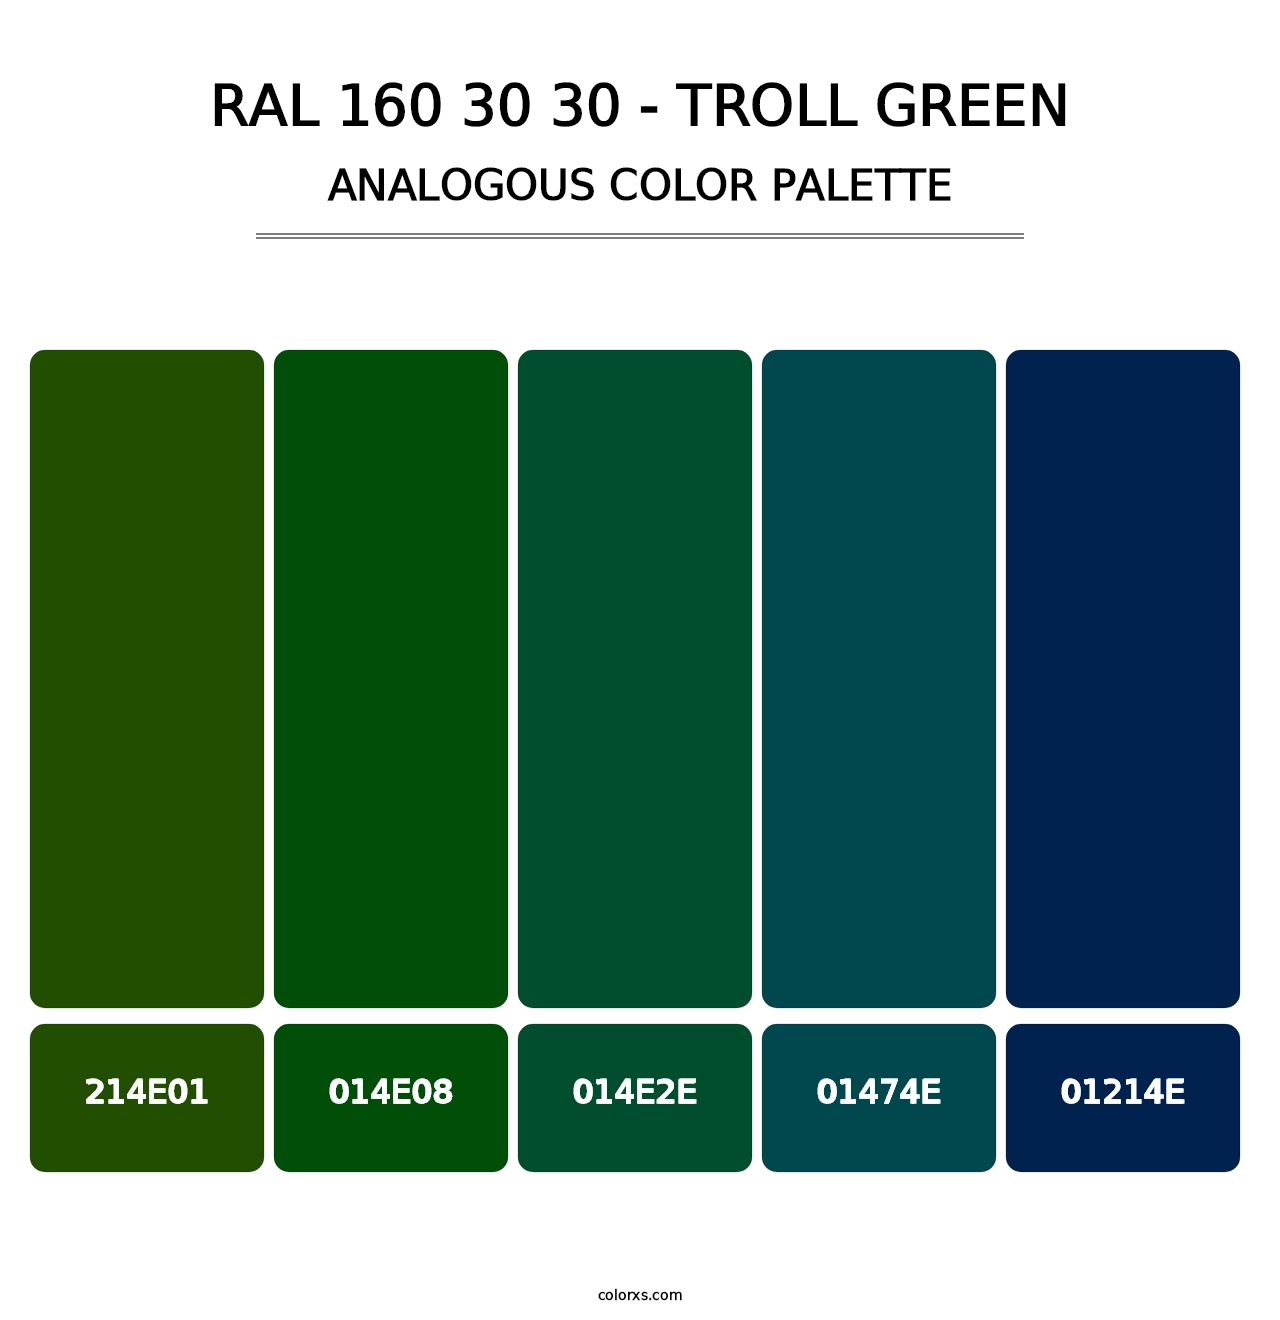 RAL 160 30 30 - Troll Green - Analogous Color Palette